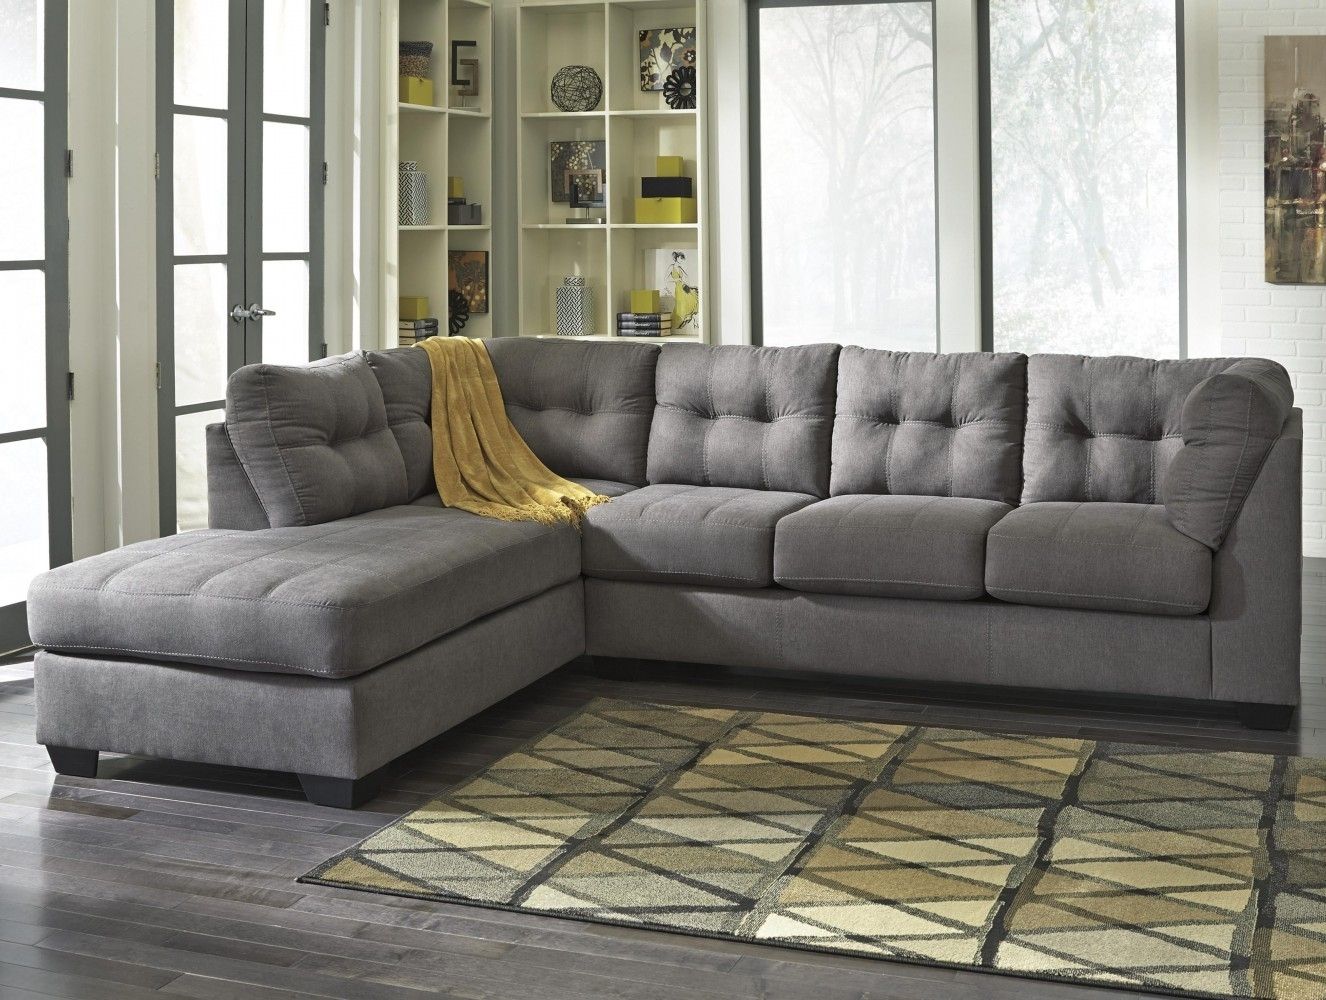 2 Piece Sectional Sofa Canada | Baci Living Room For Josephine 2 Piece Sectionals With Raf Sofa (View 8 of 30)